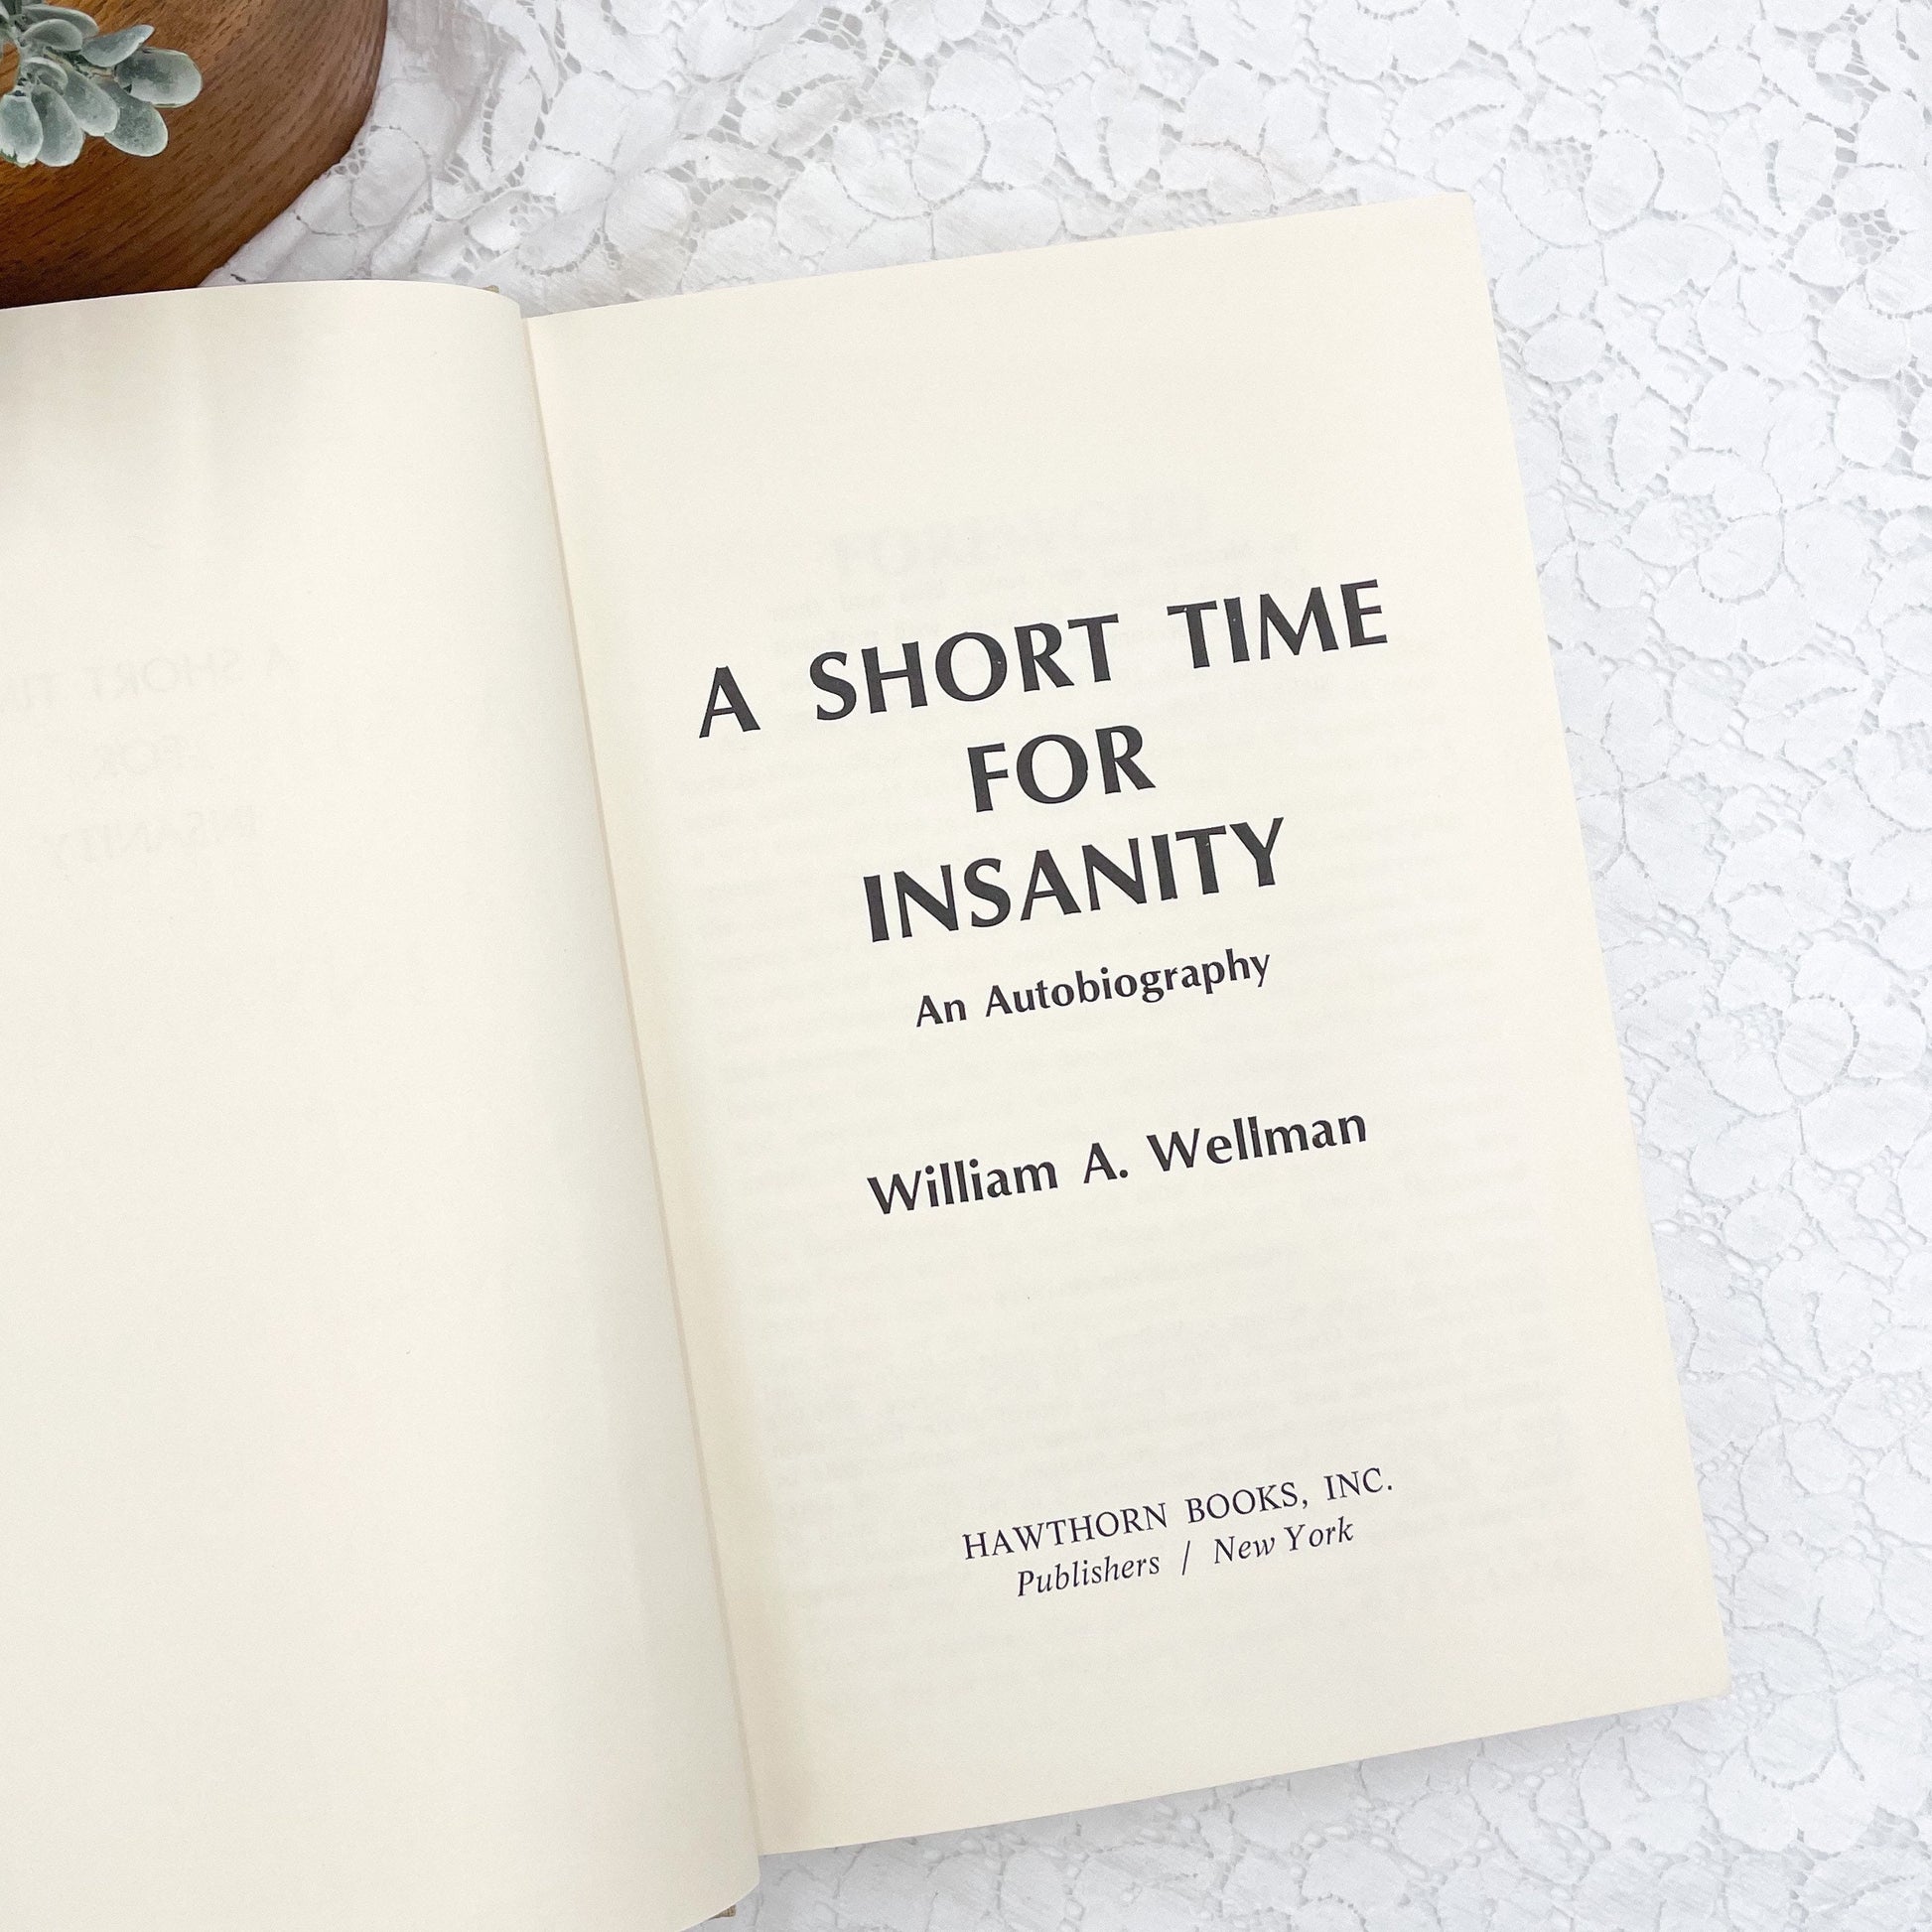 A Short Time for Insanity by William Wellman